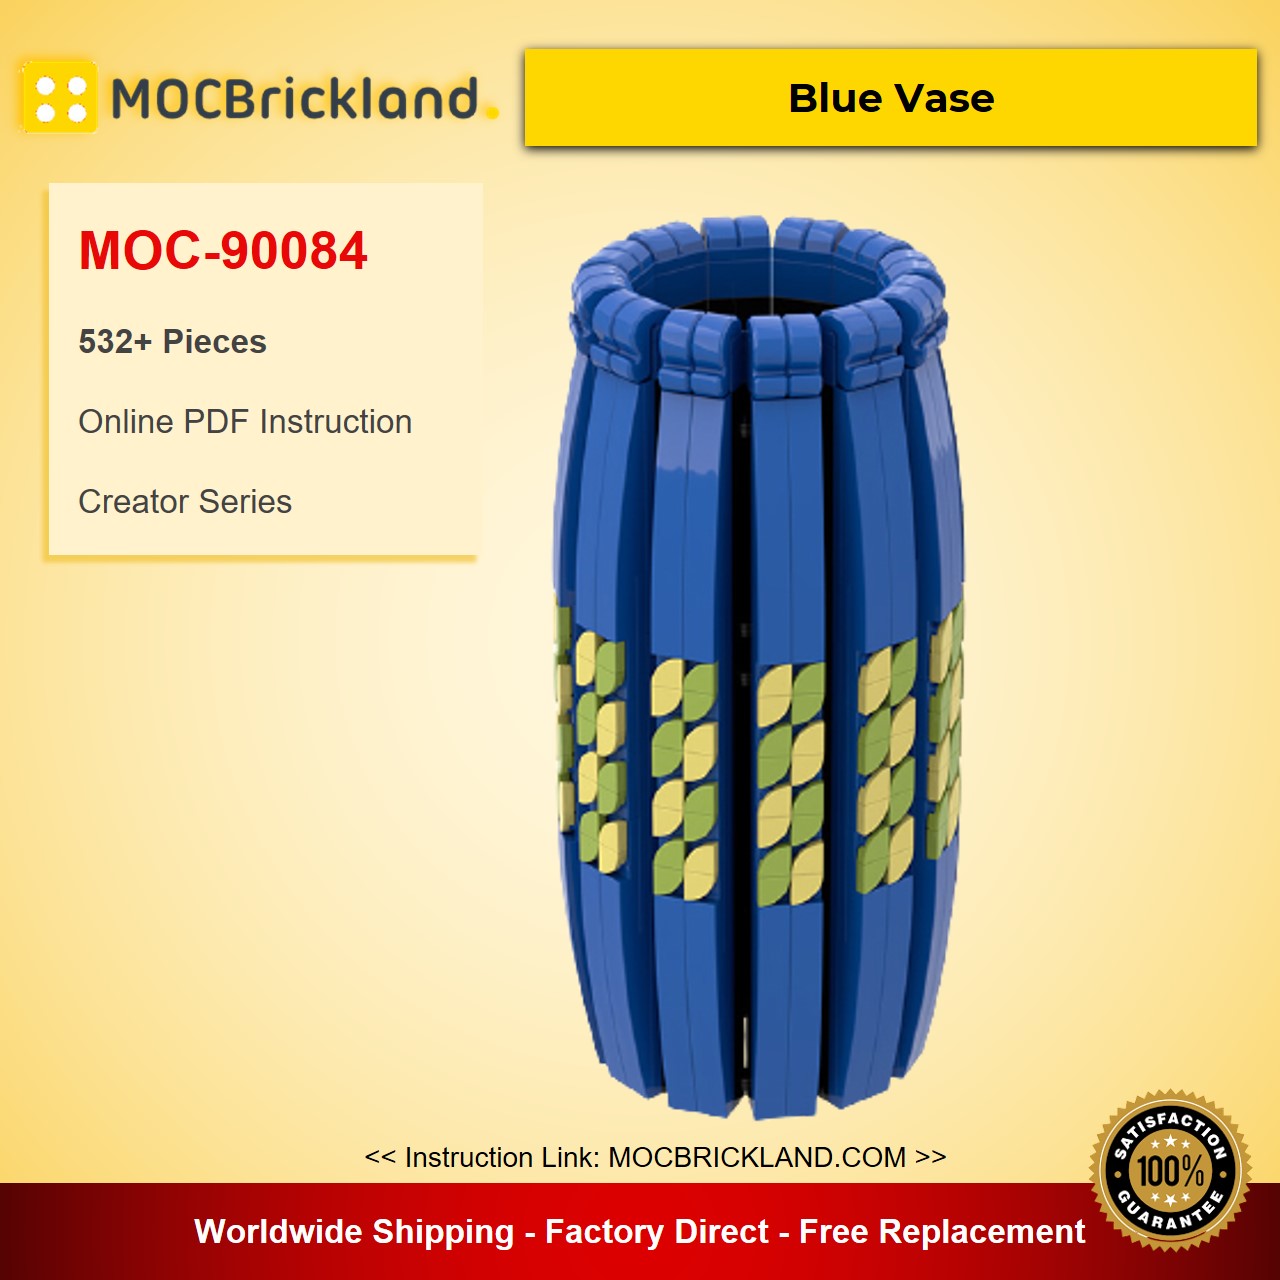 creator moc 90084 90085 90086 blue black and white vase compatible with moc flower bouquet 10280 40461 and 40460 mocbrickland 6051 1